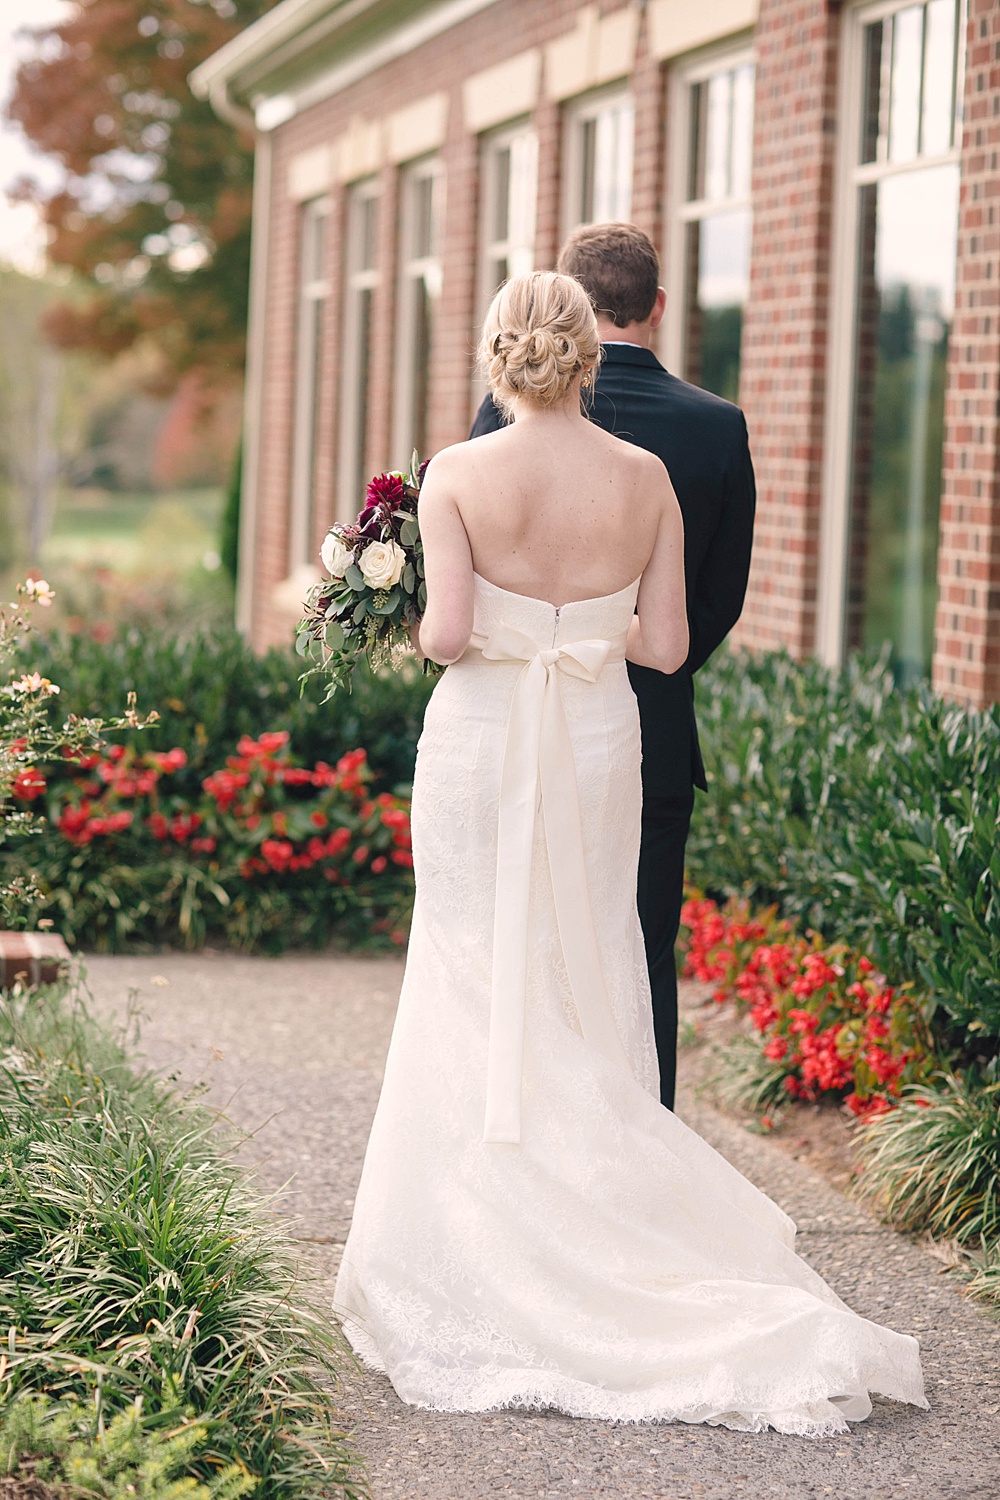 Riverbend Golf & Country Club Wedding, Wedding Planning by Bright Occasions, Kristen Gardner Photography